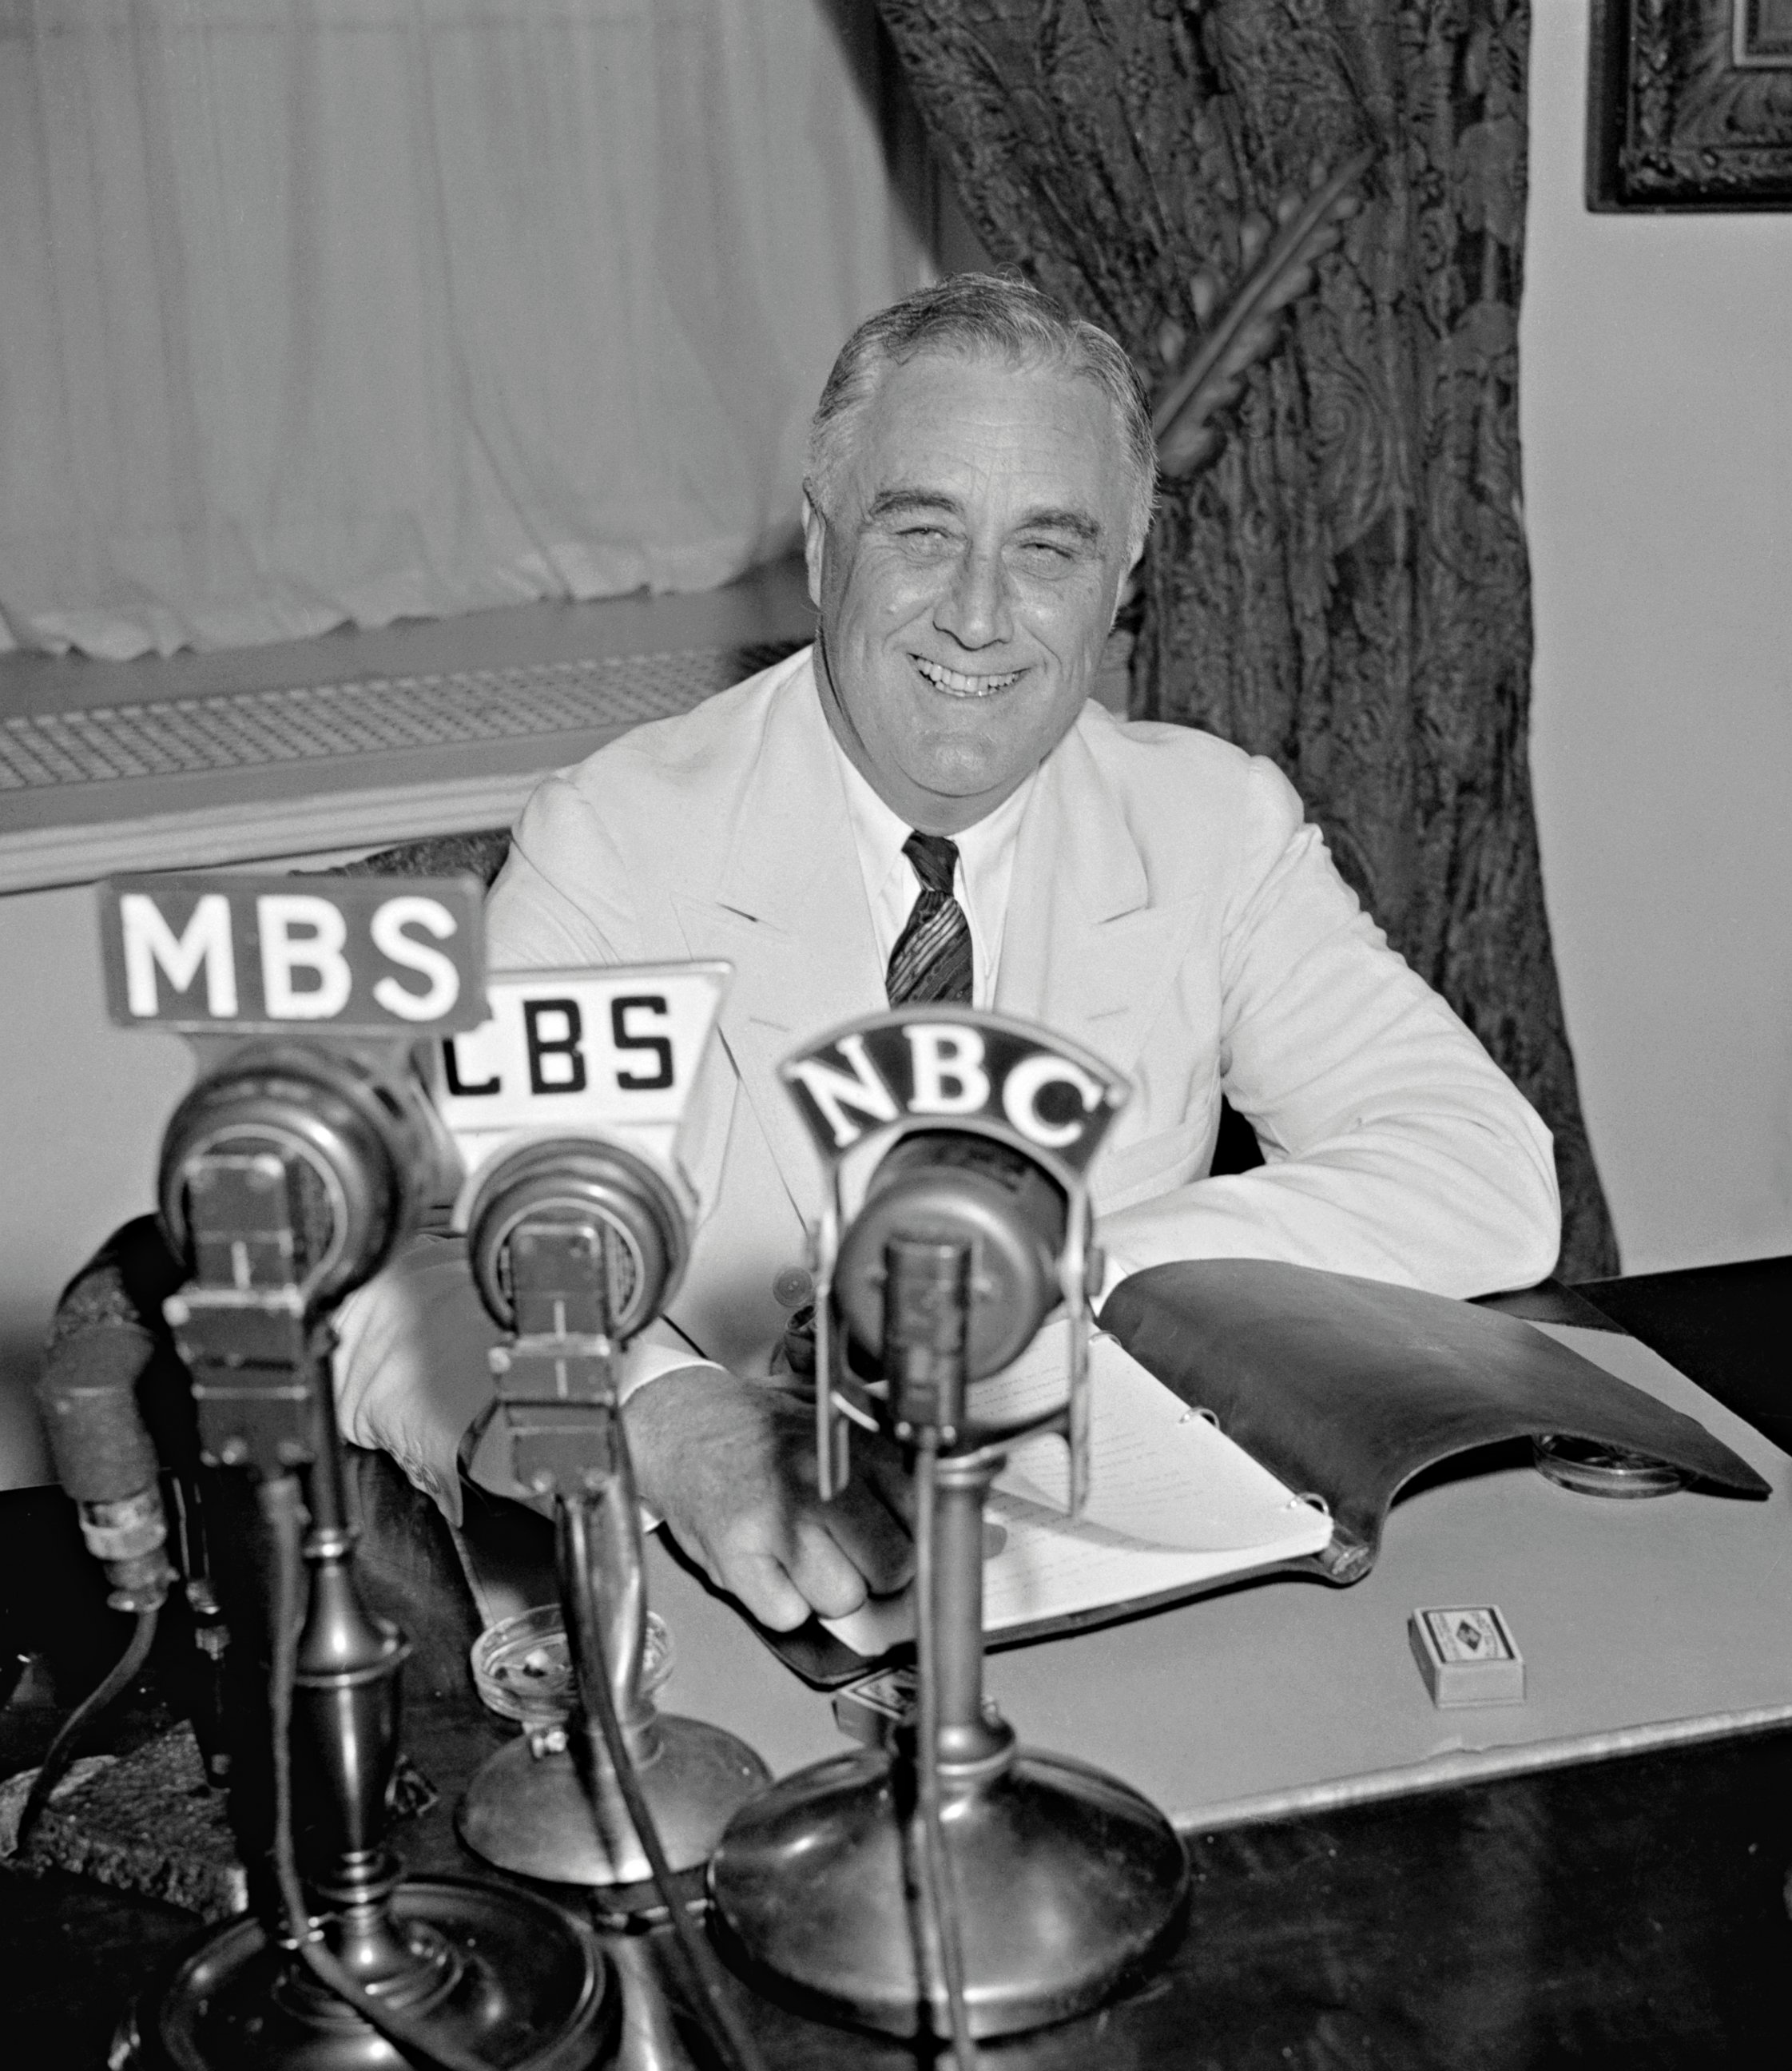 PHOTO: President Franklin D. Roosevelt smiles as he delivers one of his 'Fireside Chat' radio broadcasts from the Oval Office of the White House, Washington DC, 1938.